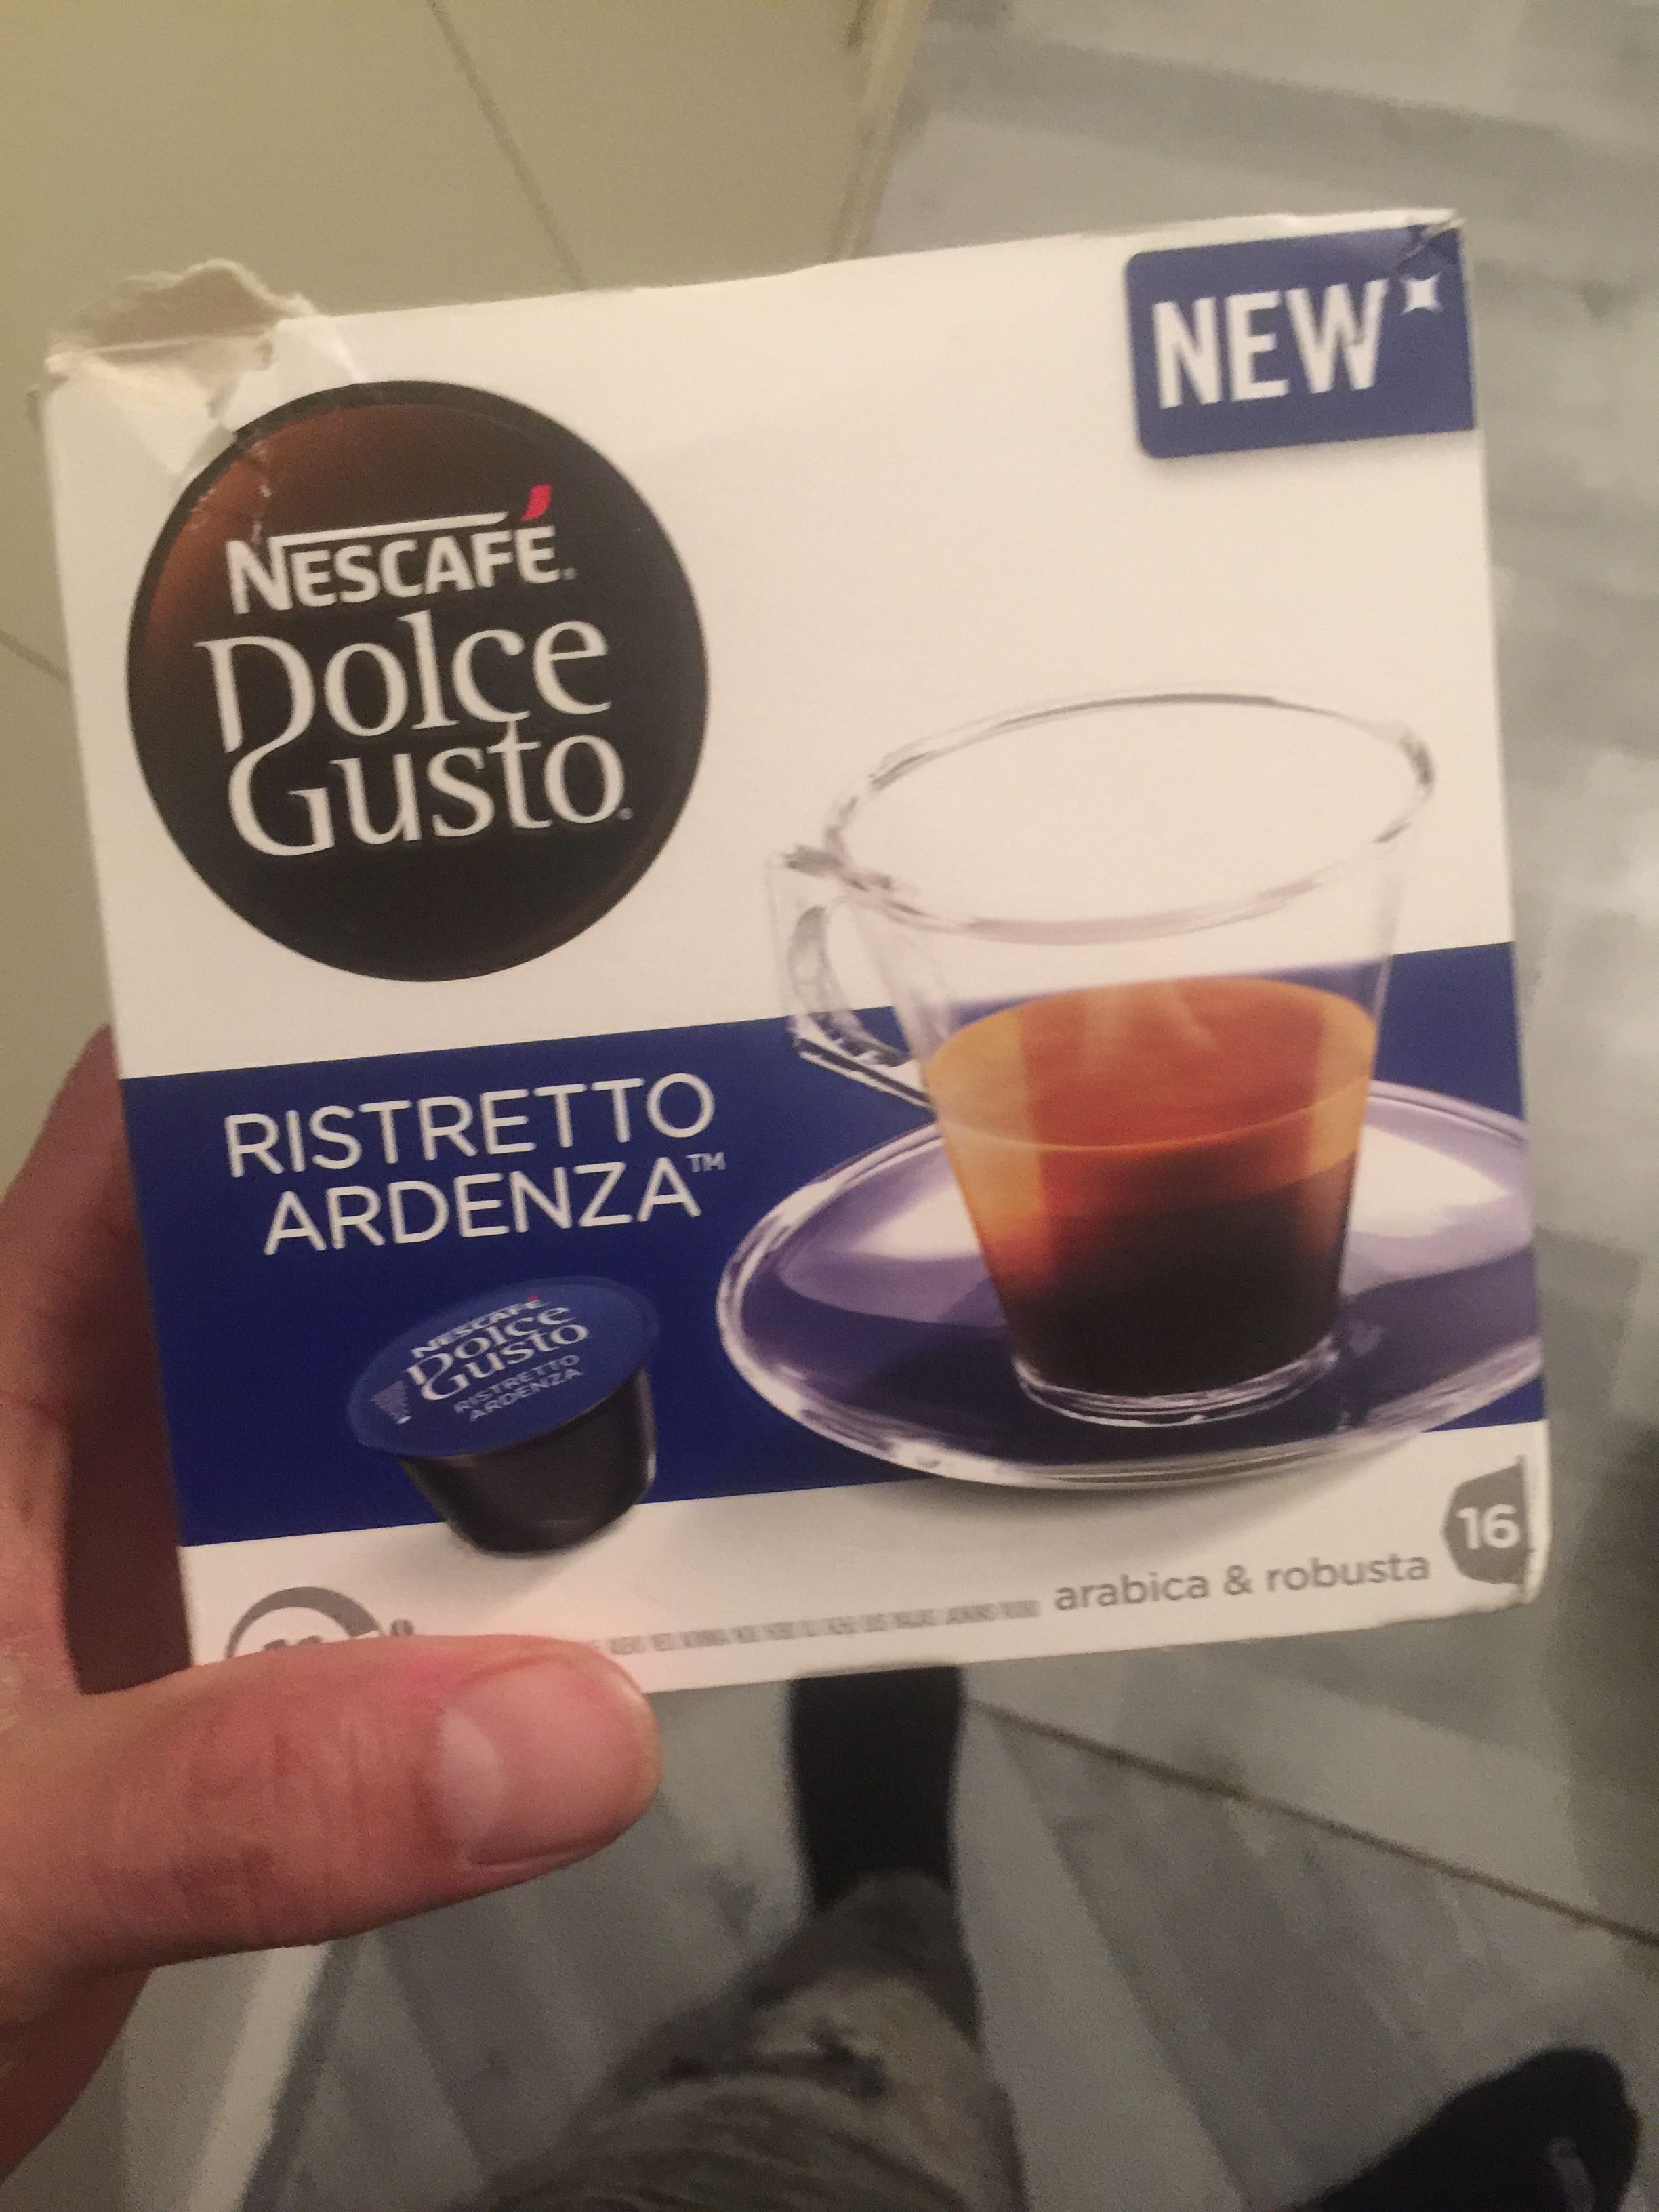 Dolce Gusto ristretto ardenza - Product - fr